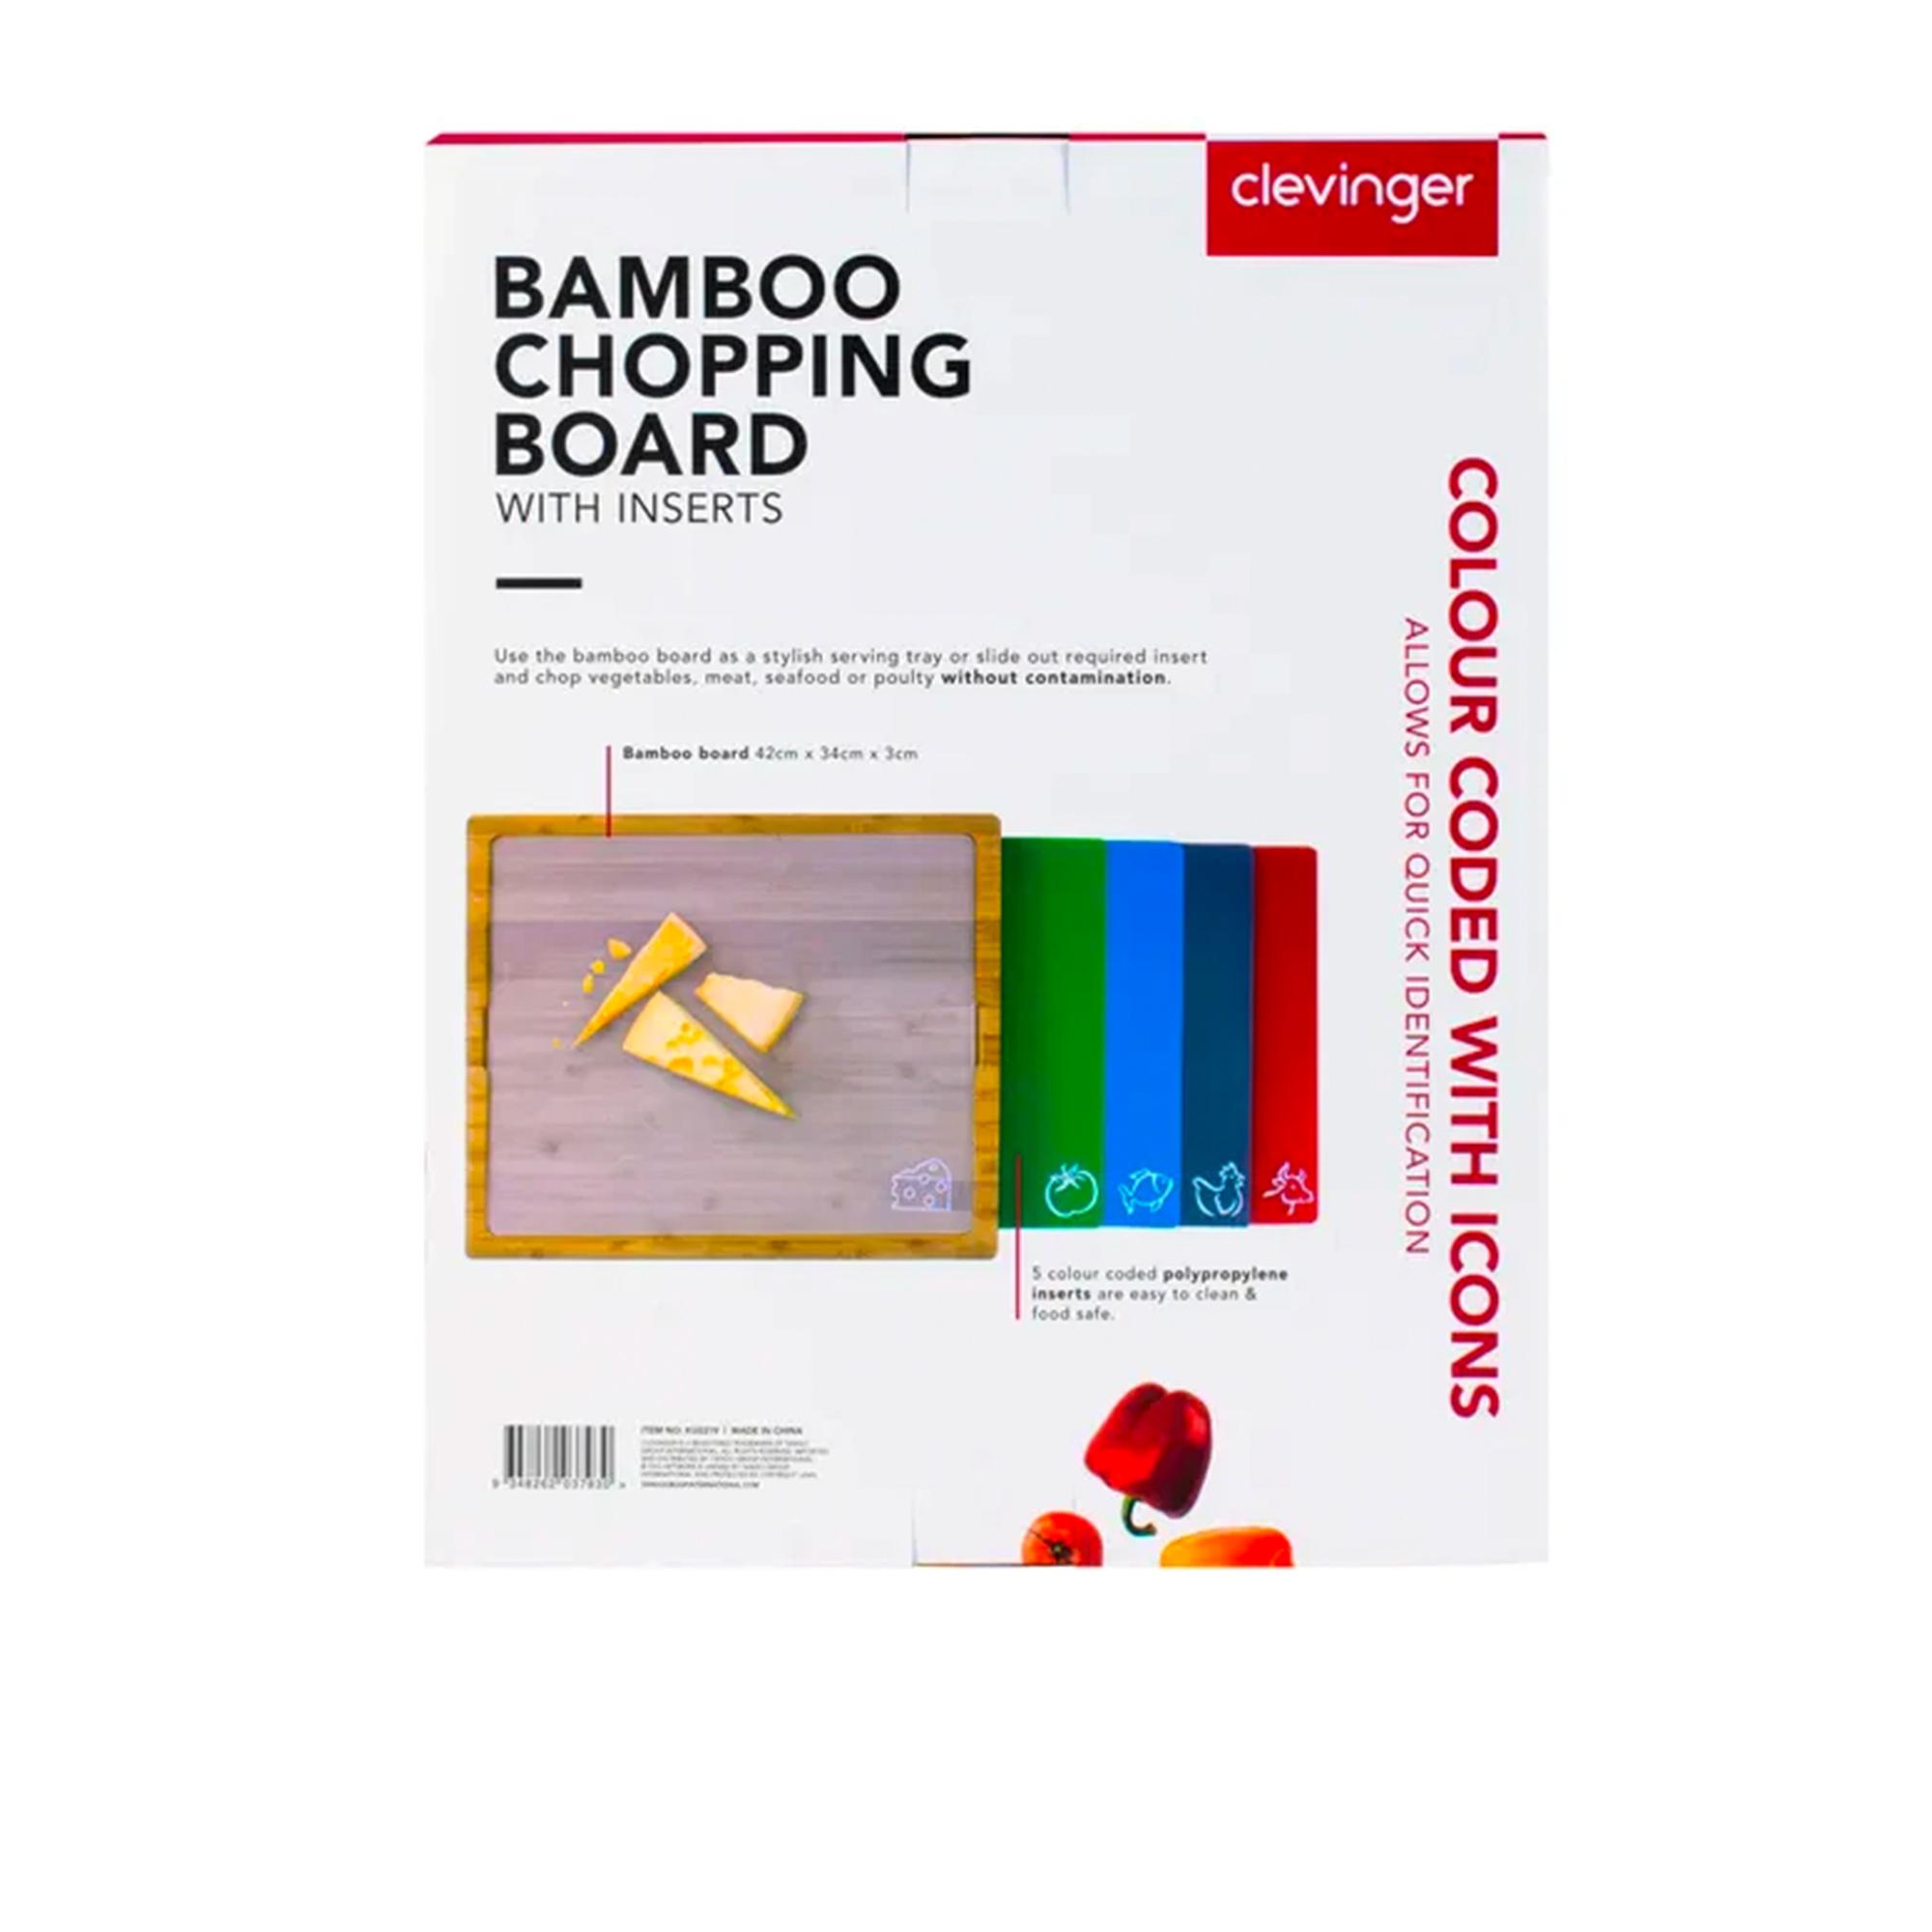 Clevinger Bamboo Chopping Board Set 5pc Image 5